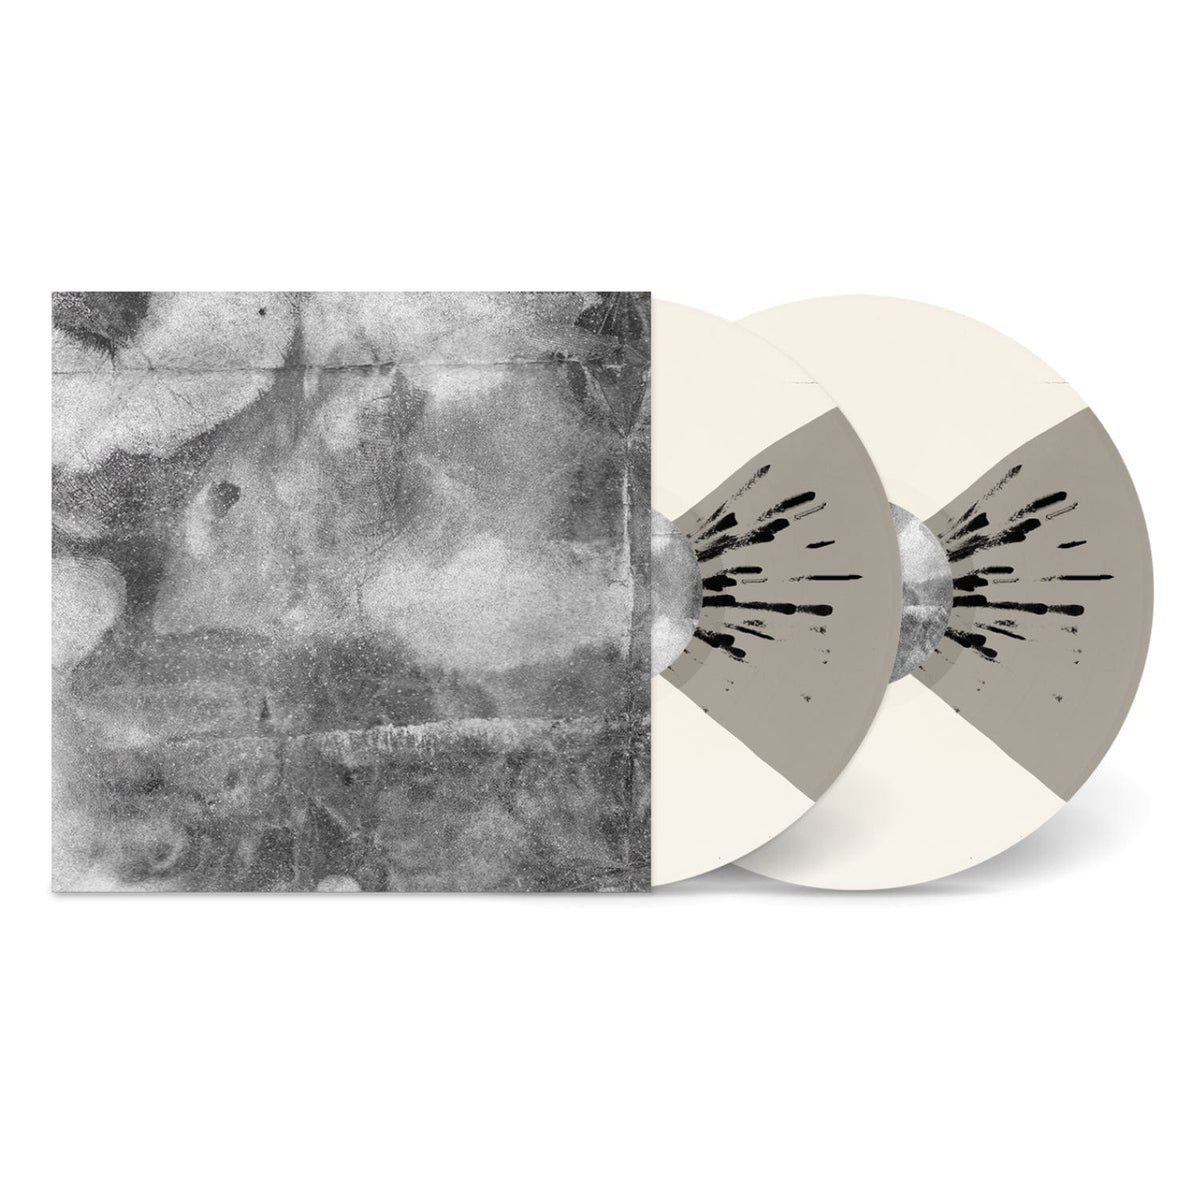 The Flenser Vinyl Butterfly Vinyl Planning for Burial &quot;Matawan - Collected Works 2010-2014 LP (Vol. 2)&quot; DLP (pre-order)